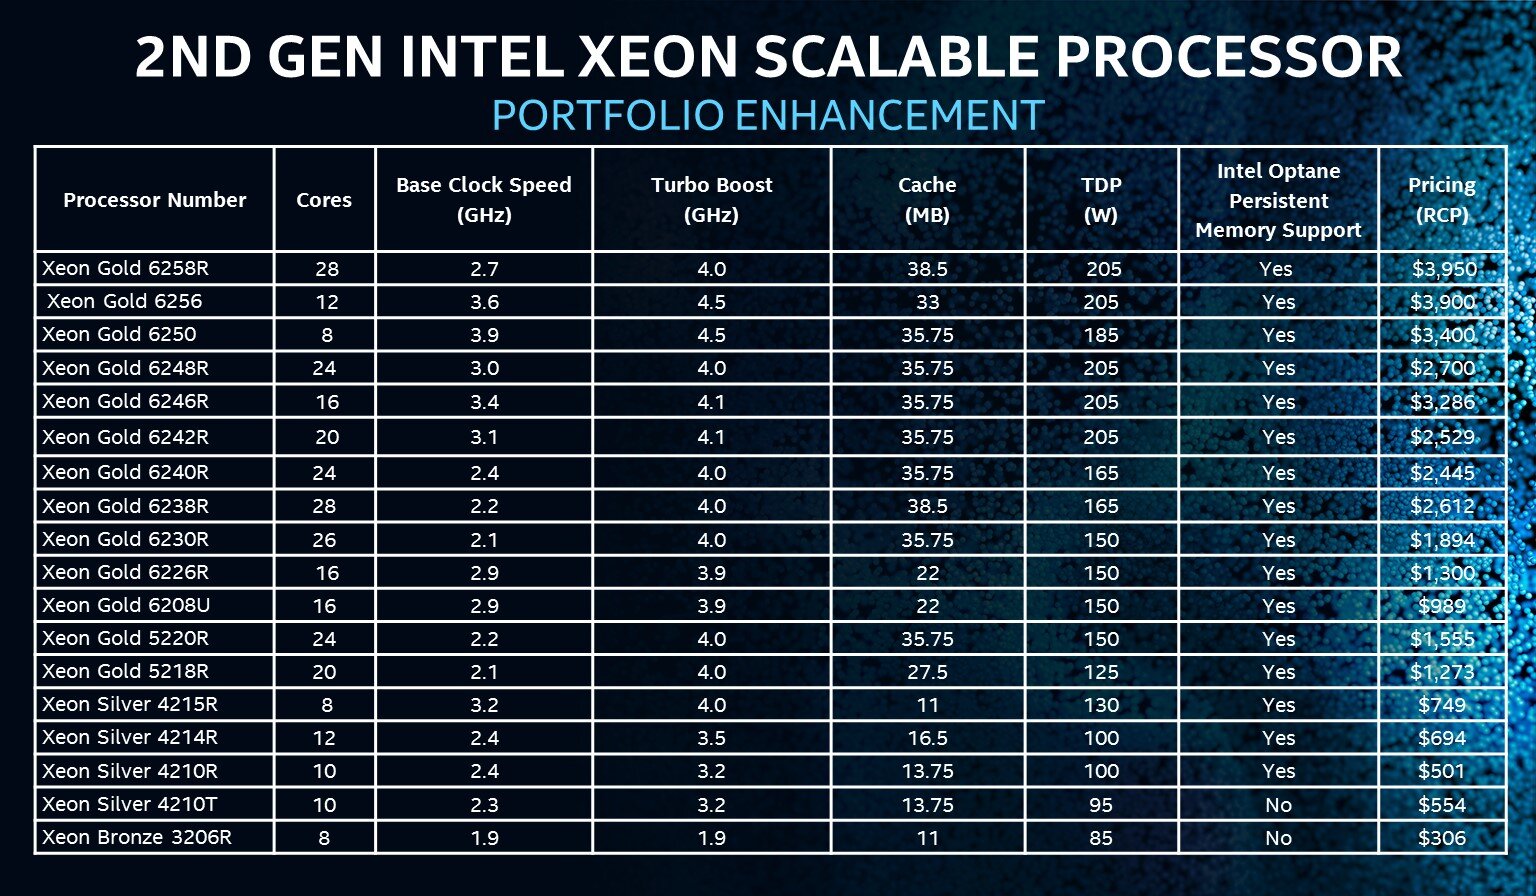 2nd-Gen Xeon Scalable SKU Stack